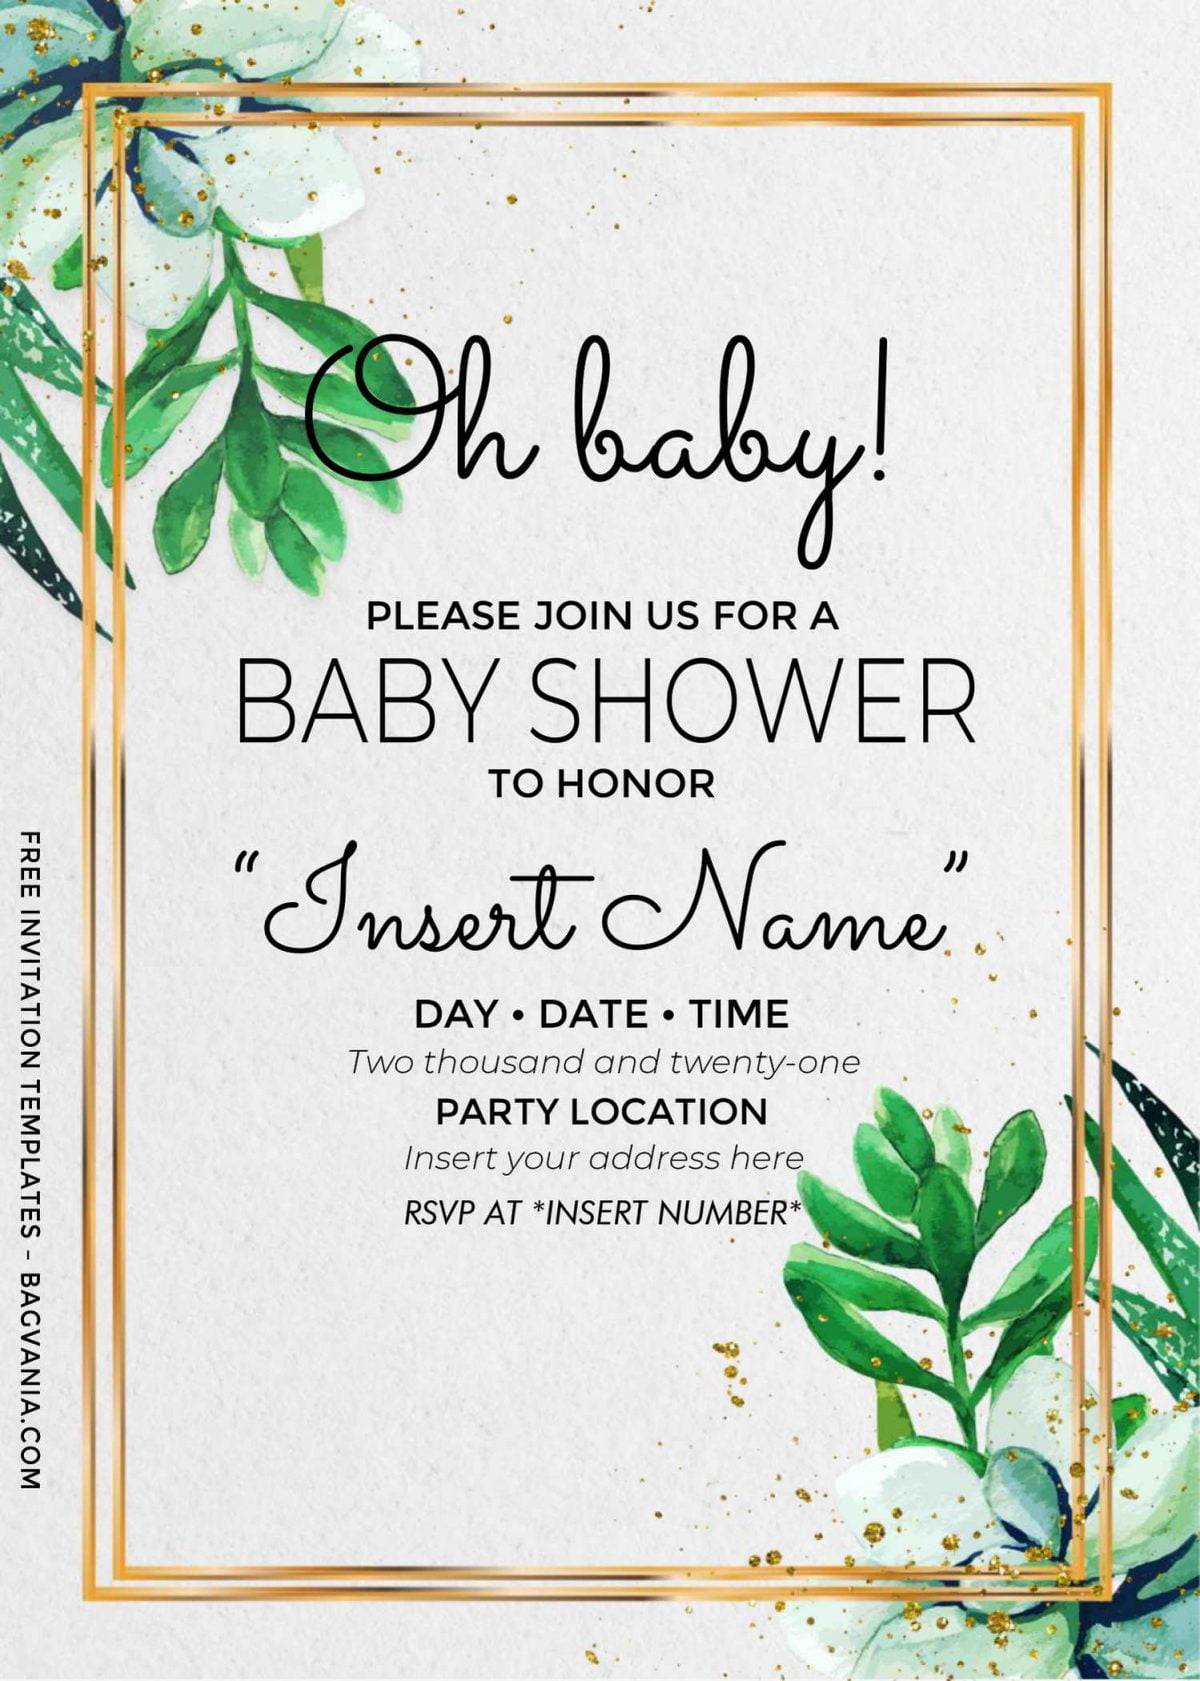 Free Oh Baby Cactus Birthday Invitation Templates For Word and has sparkling gold glitter splatter and text frame